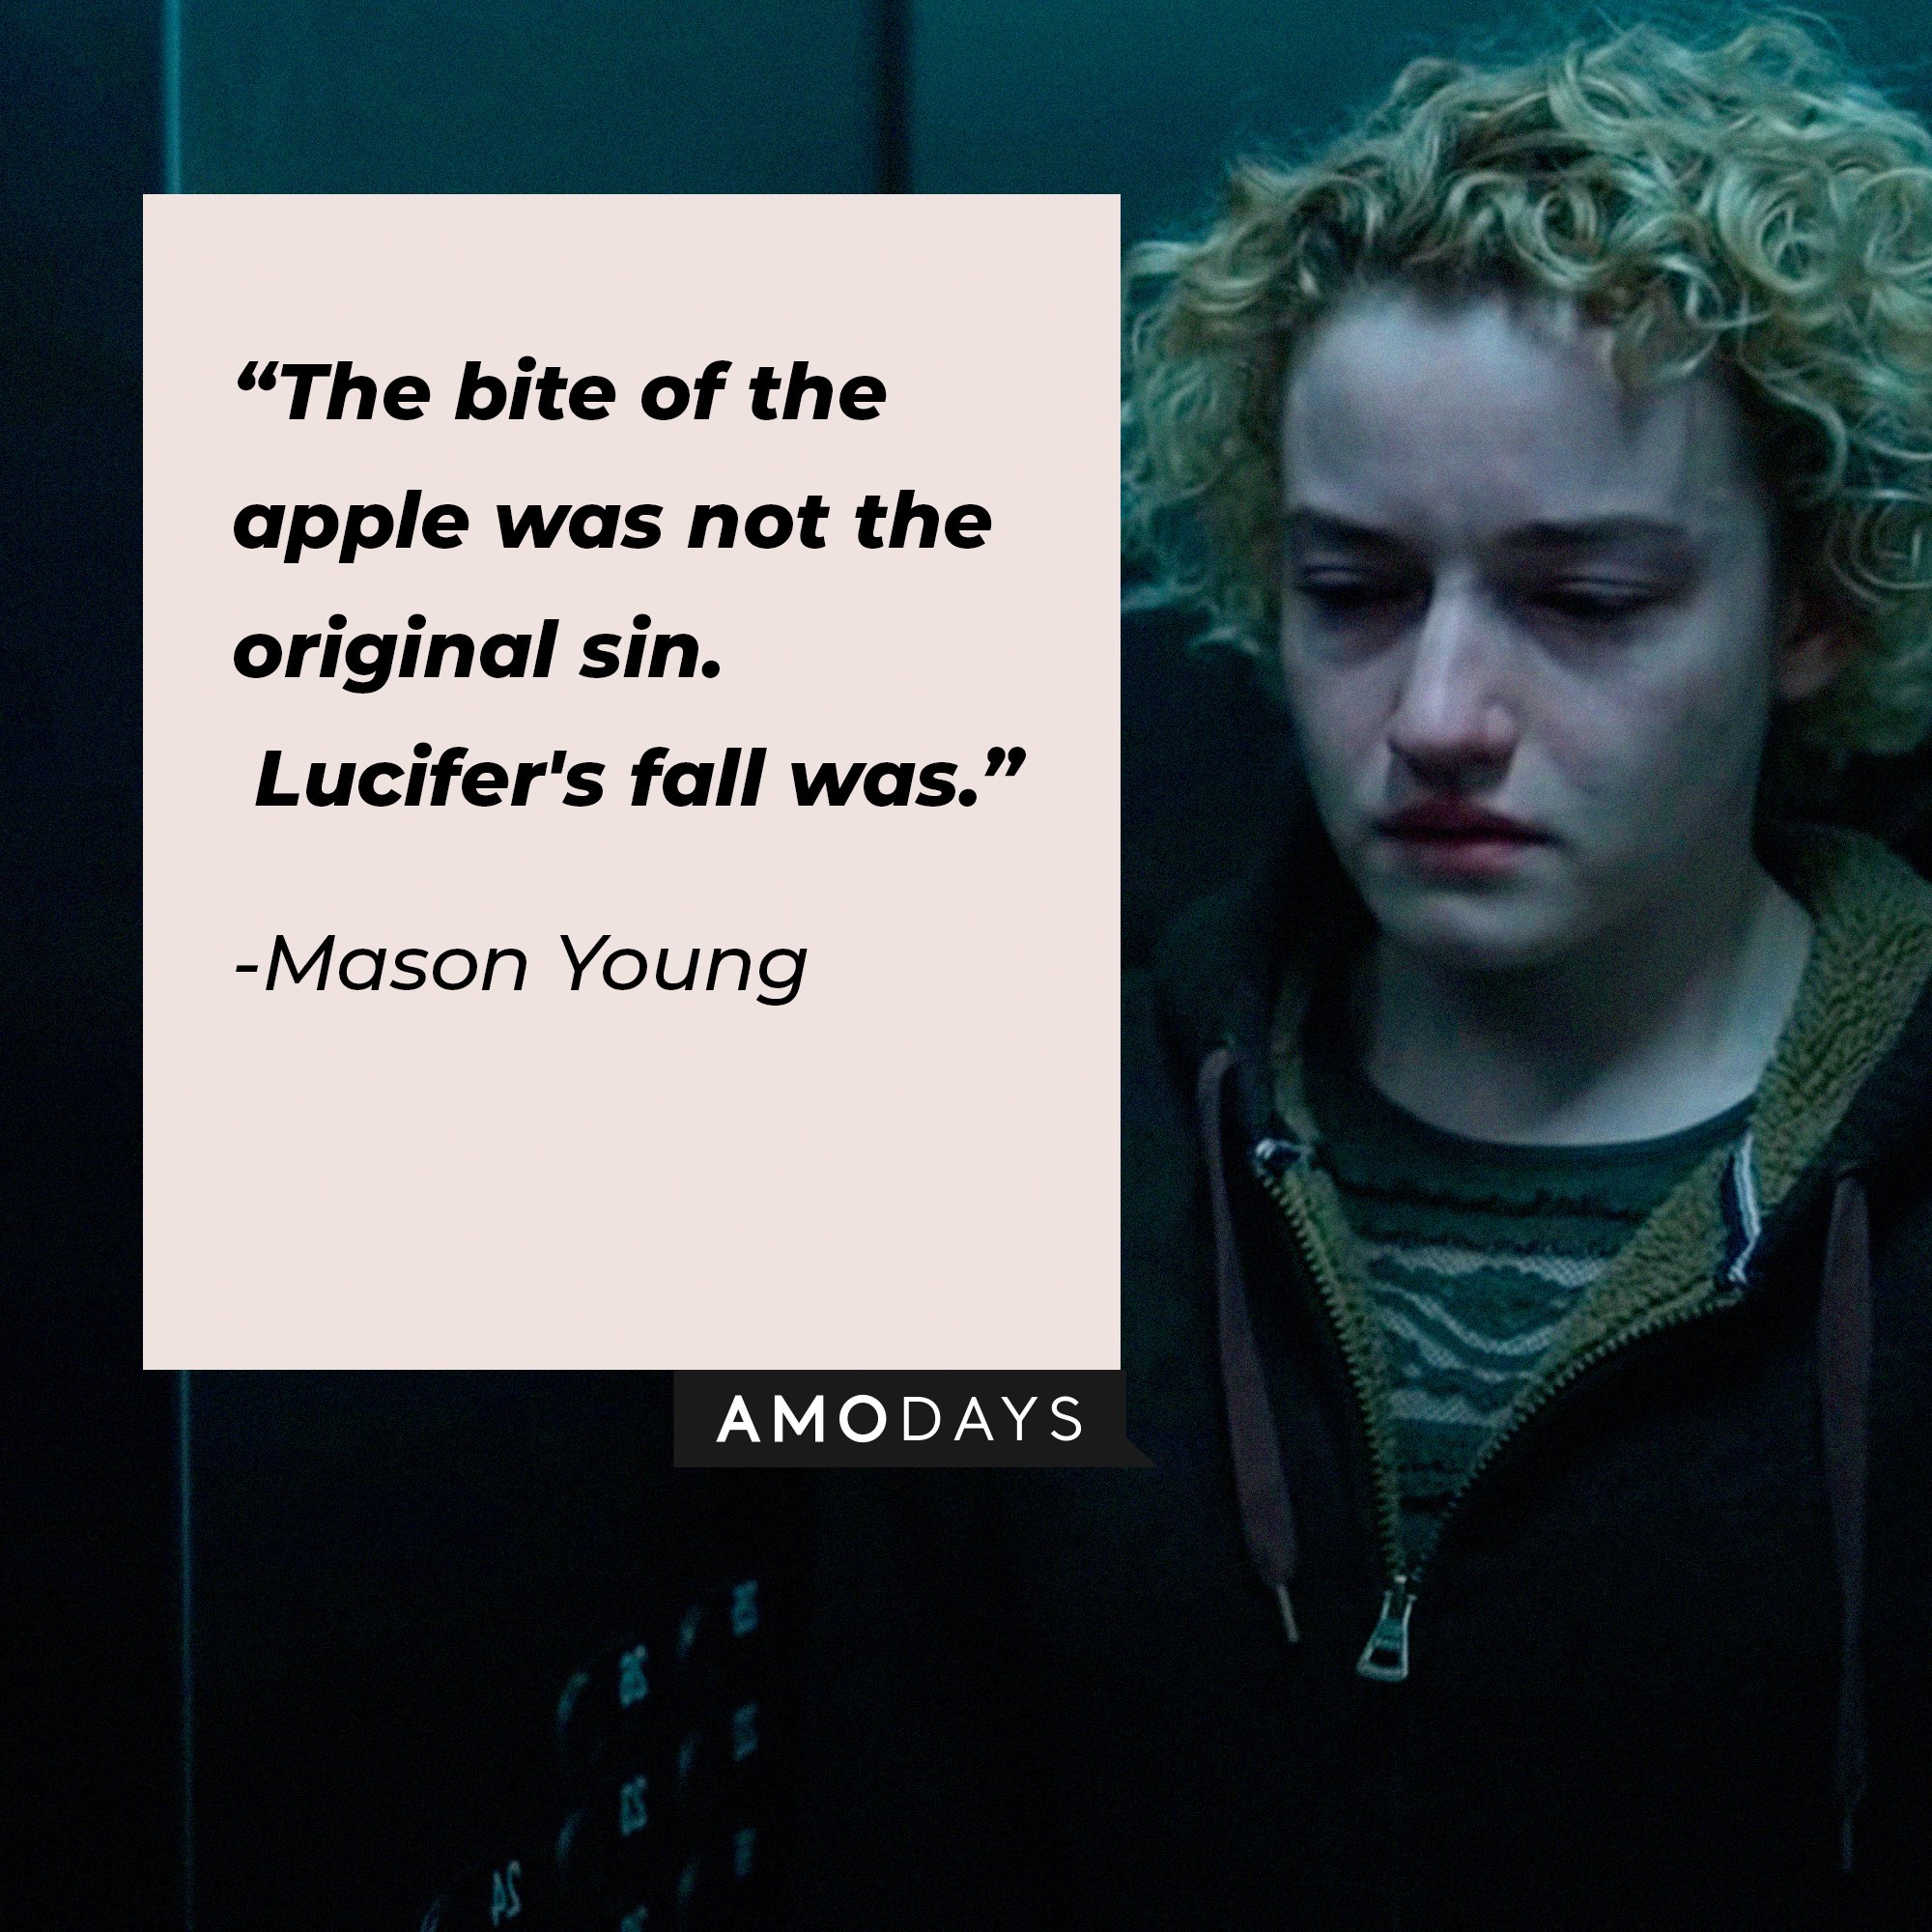 Mason Young’s quote: “The bite of the apple was not the original sin. Lucifer's fall was.”  | Image: AmoDays